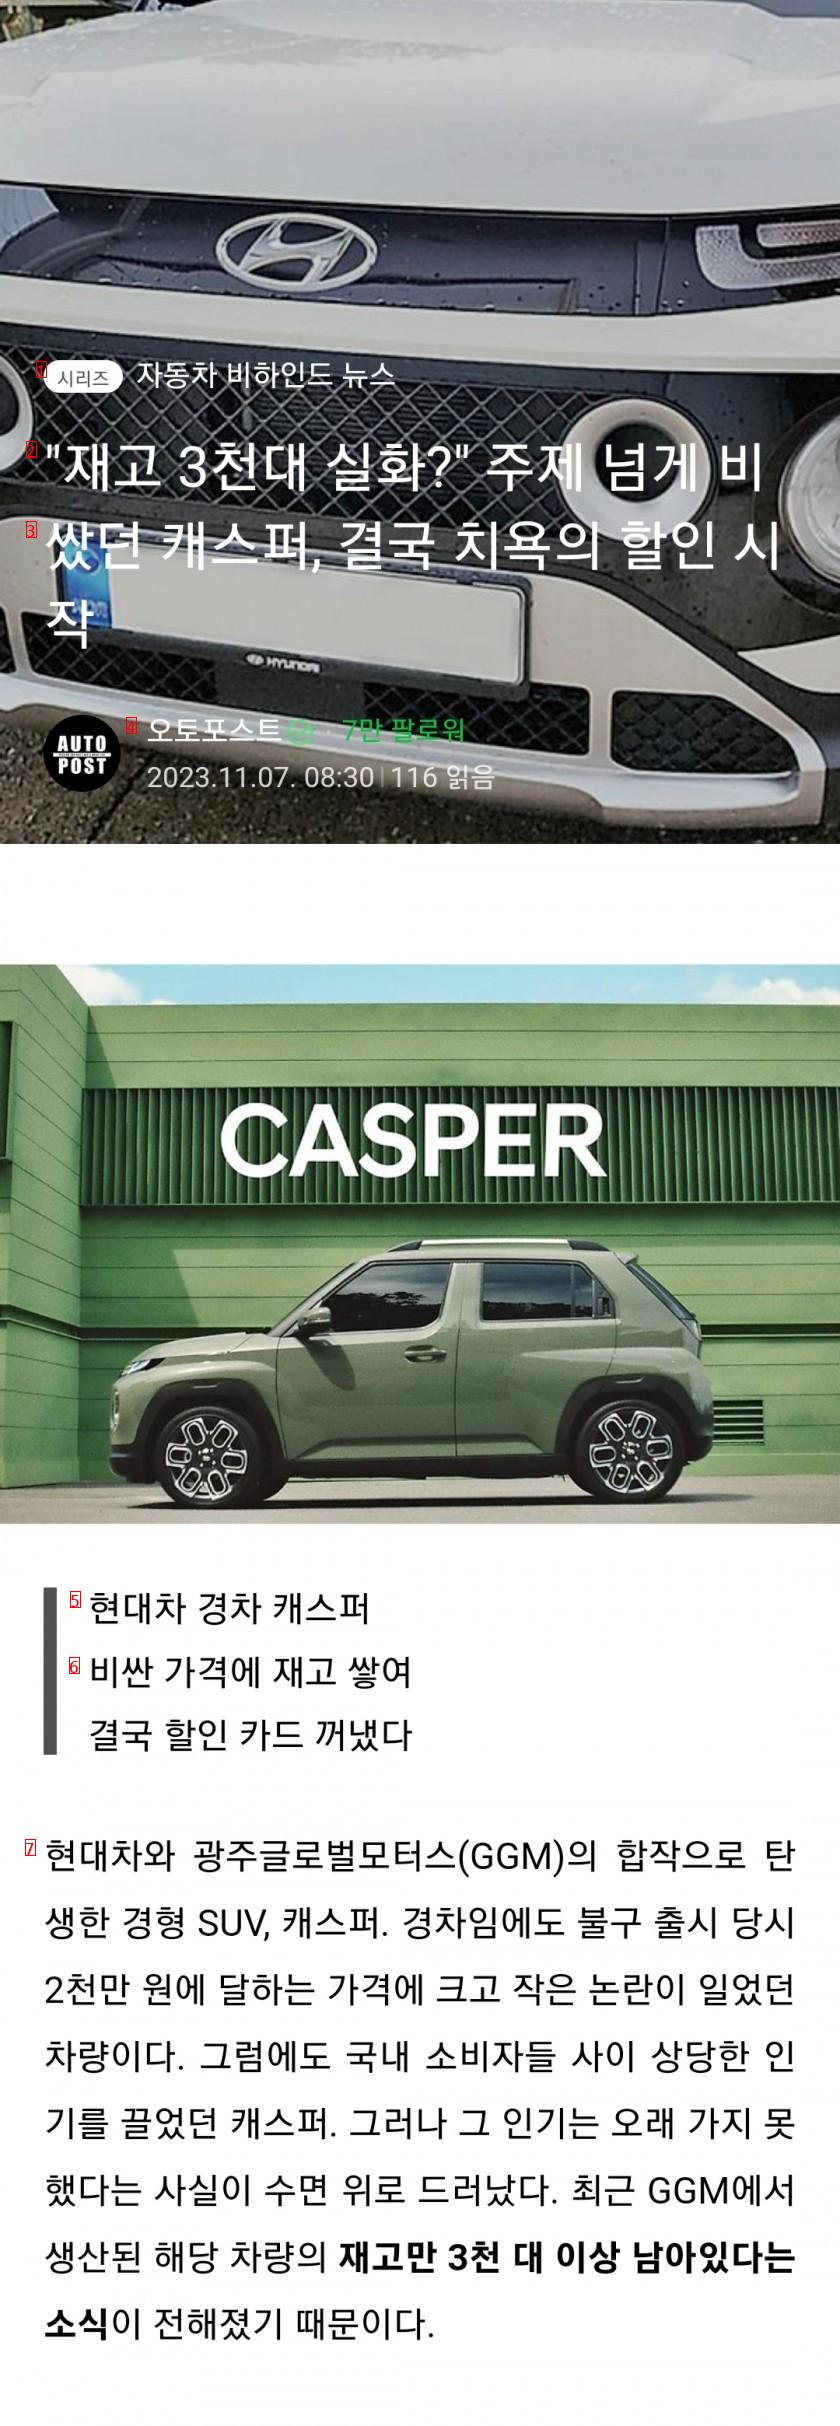 "3,000 units in stock." Casper's tears, which was too expensive, started discounting